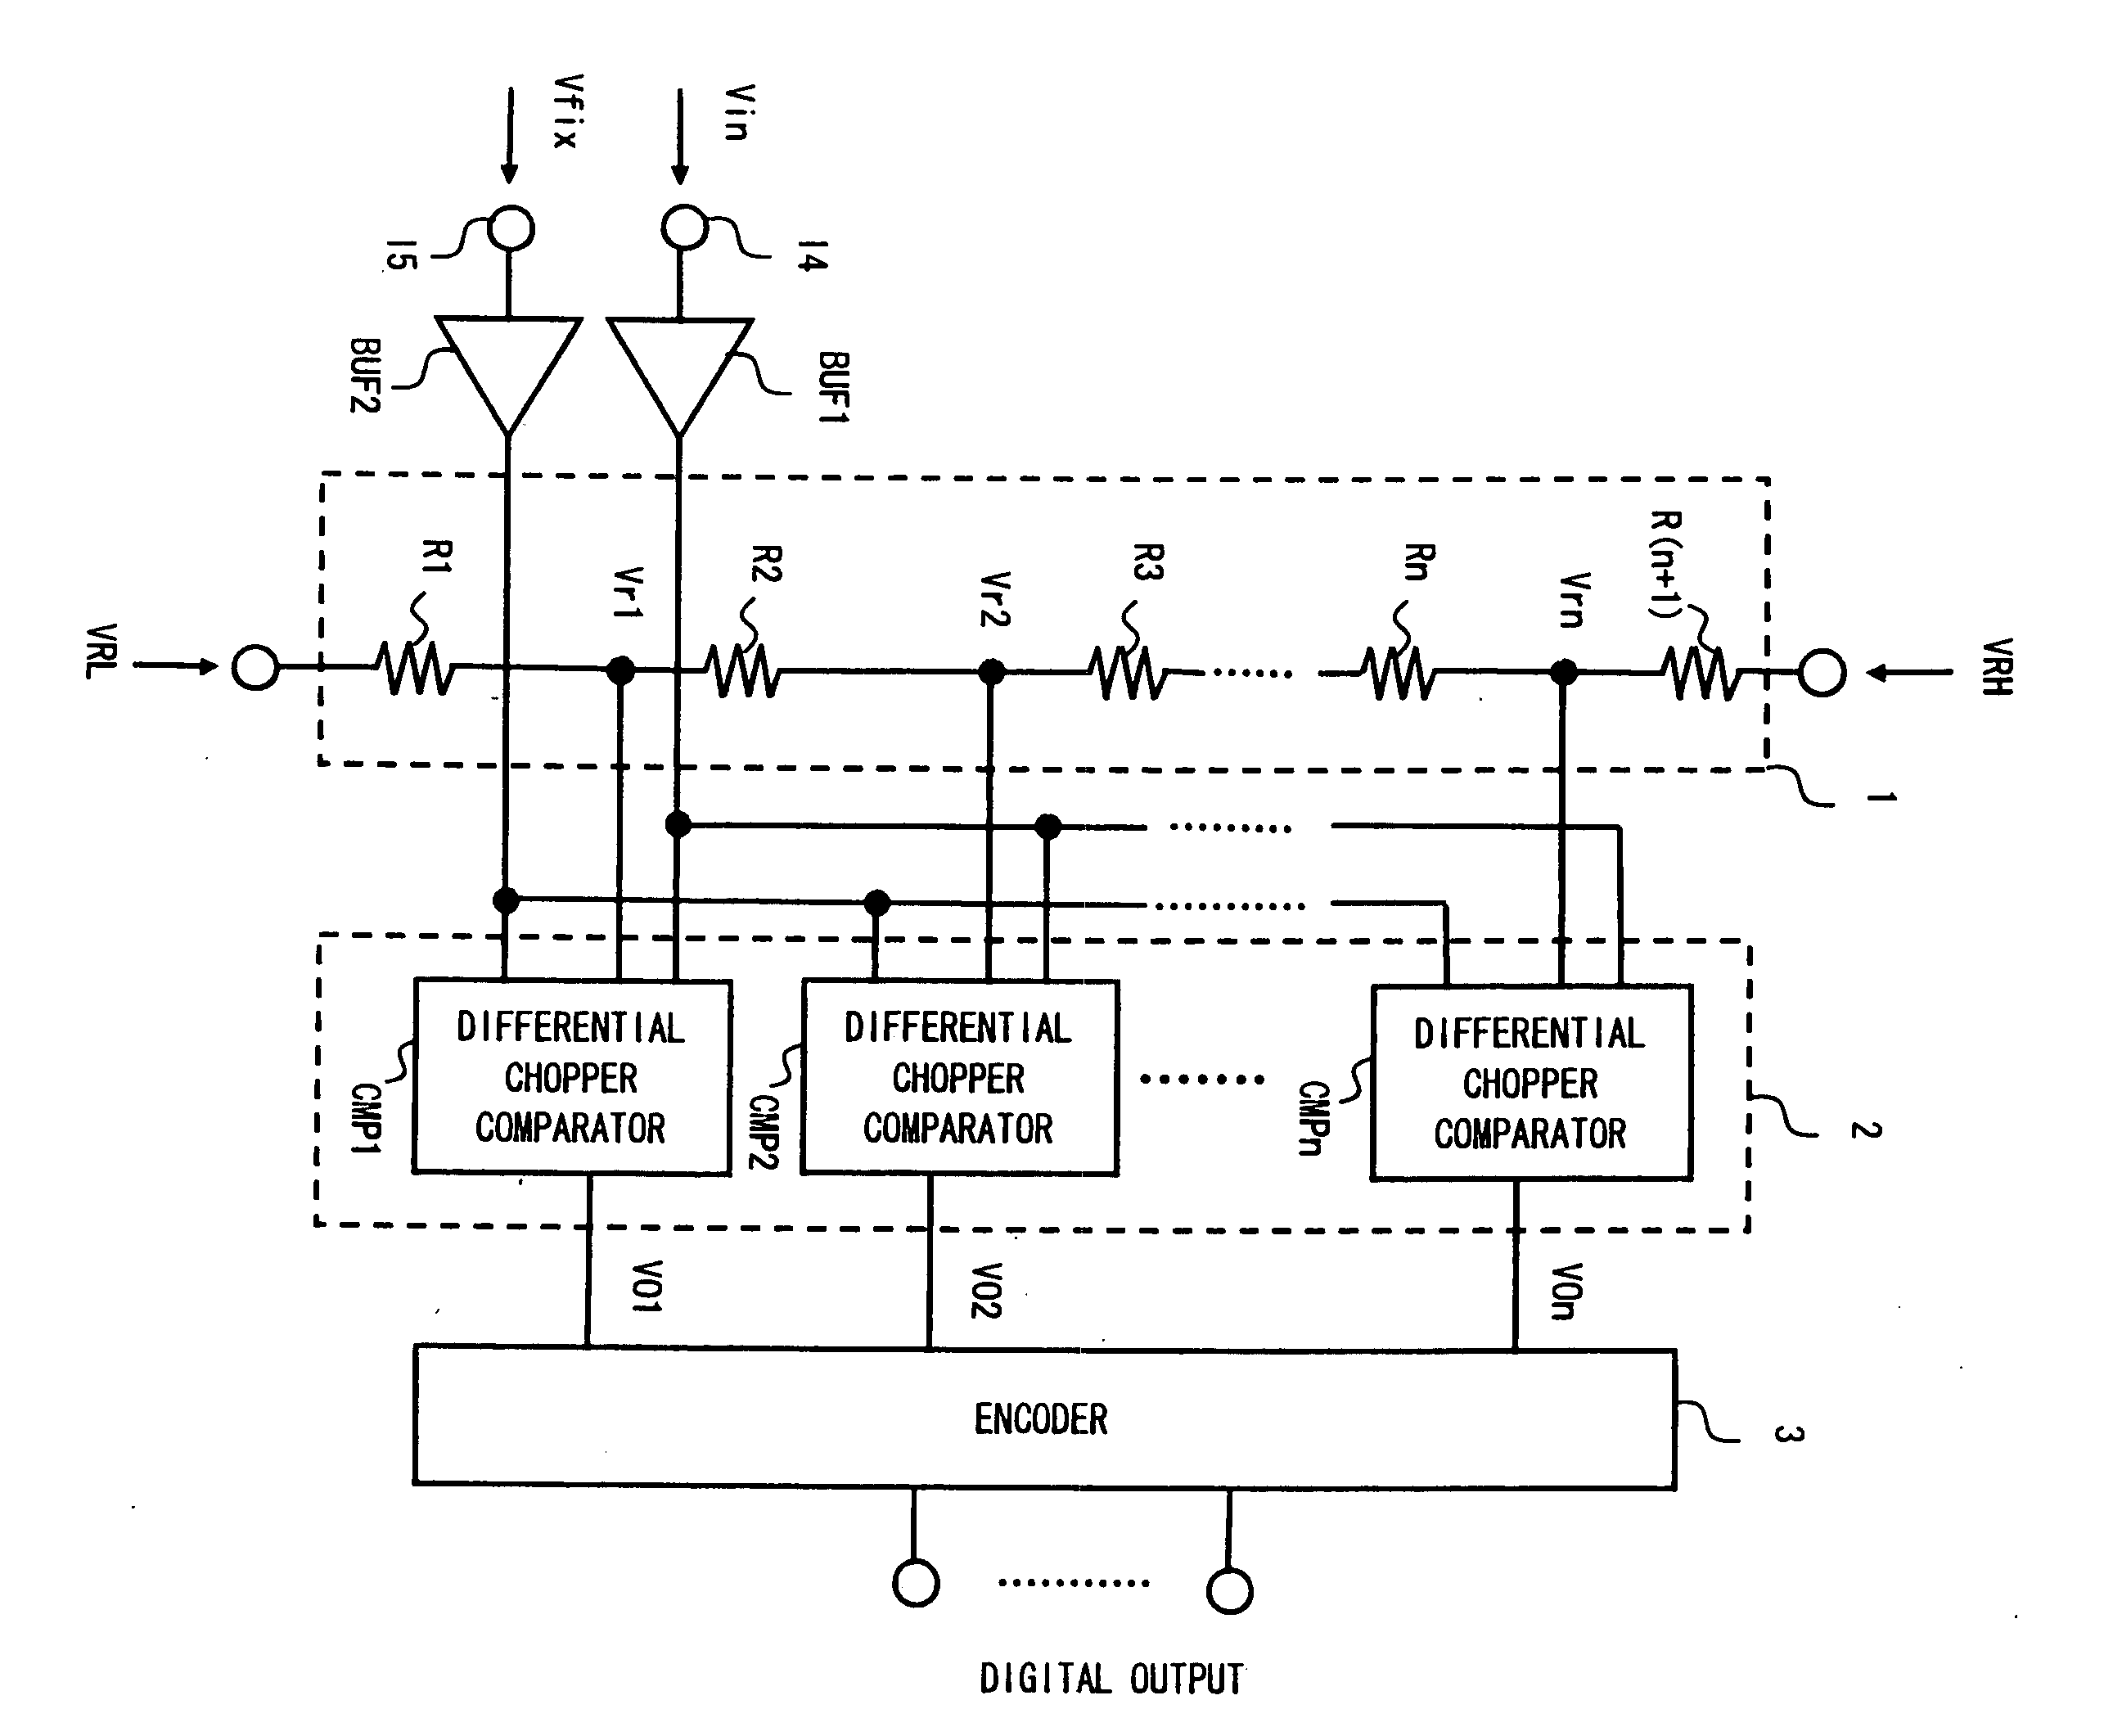 Differential chopper comparator and A/D converter including the same